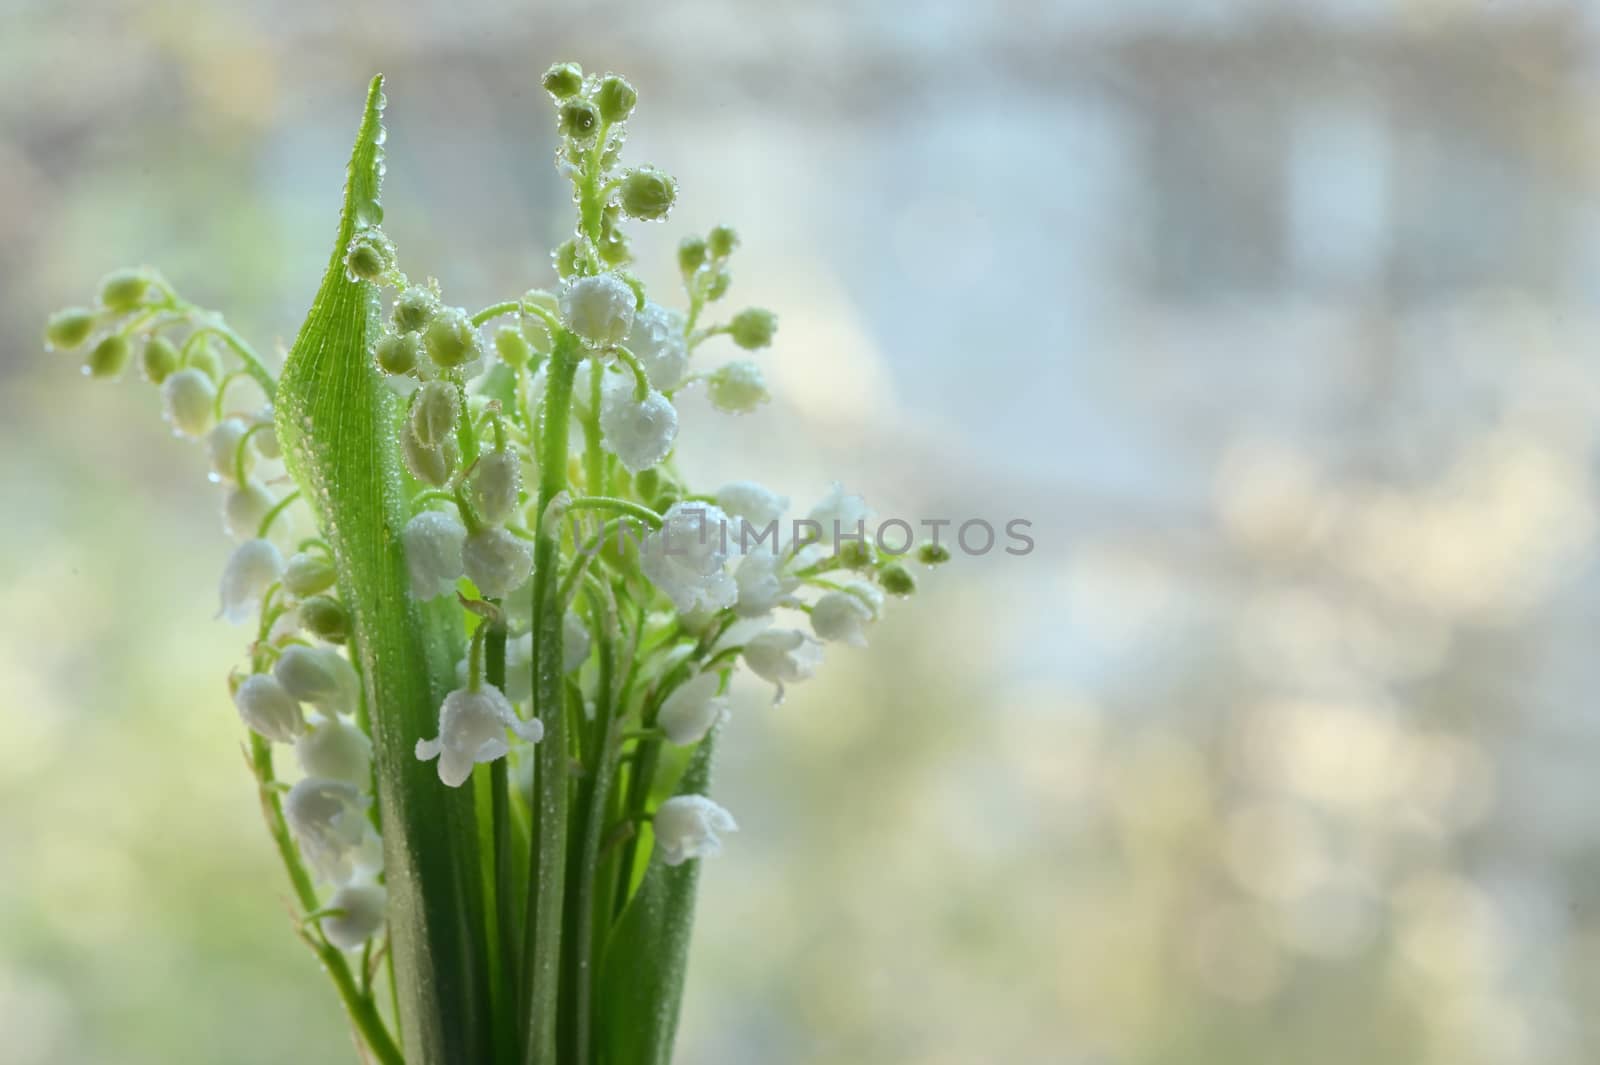 Smell Lily Of The Valley Or May-Lily With Drops by mady70